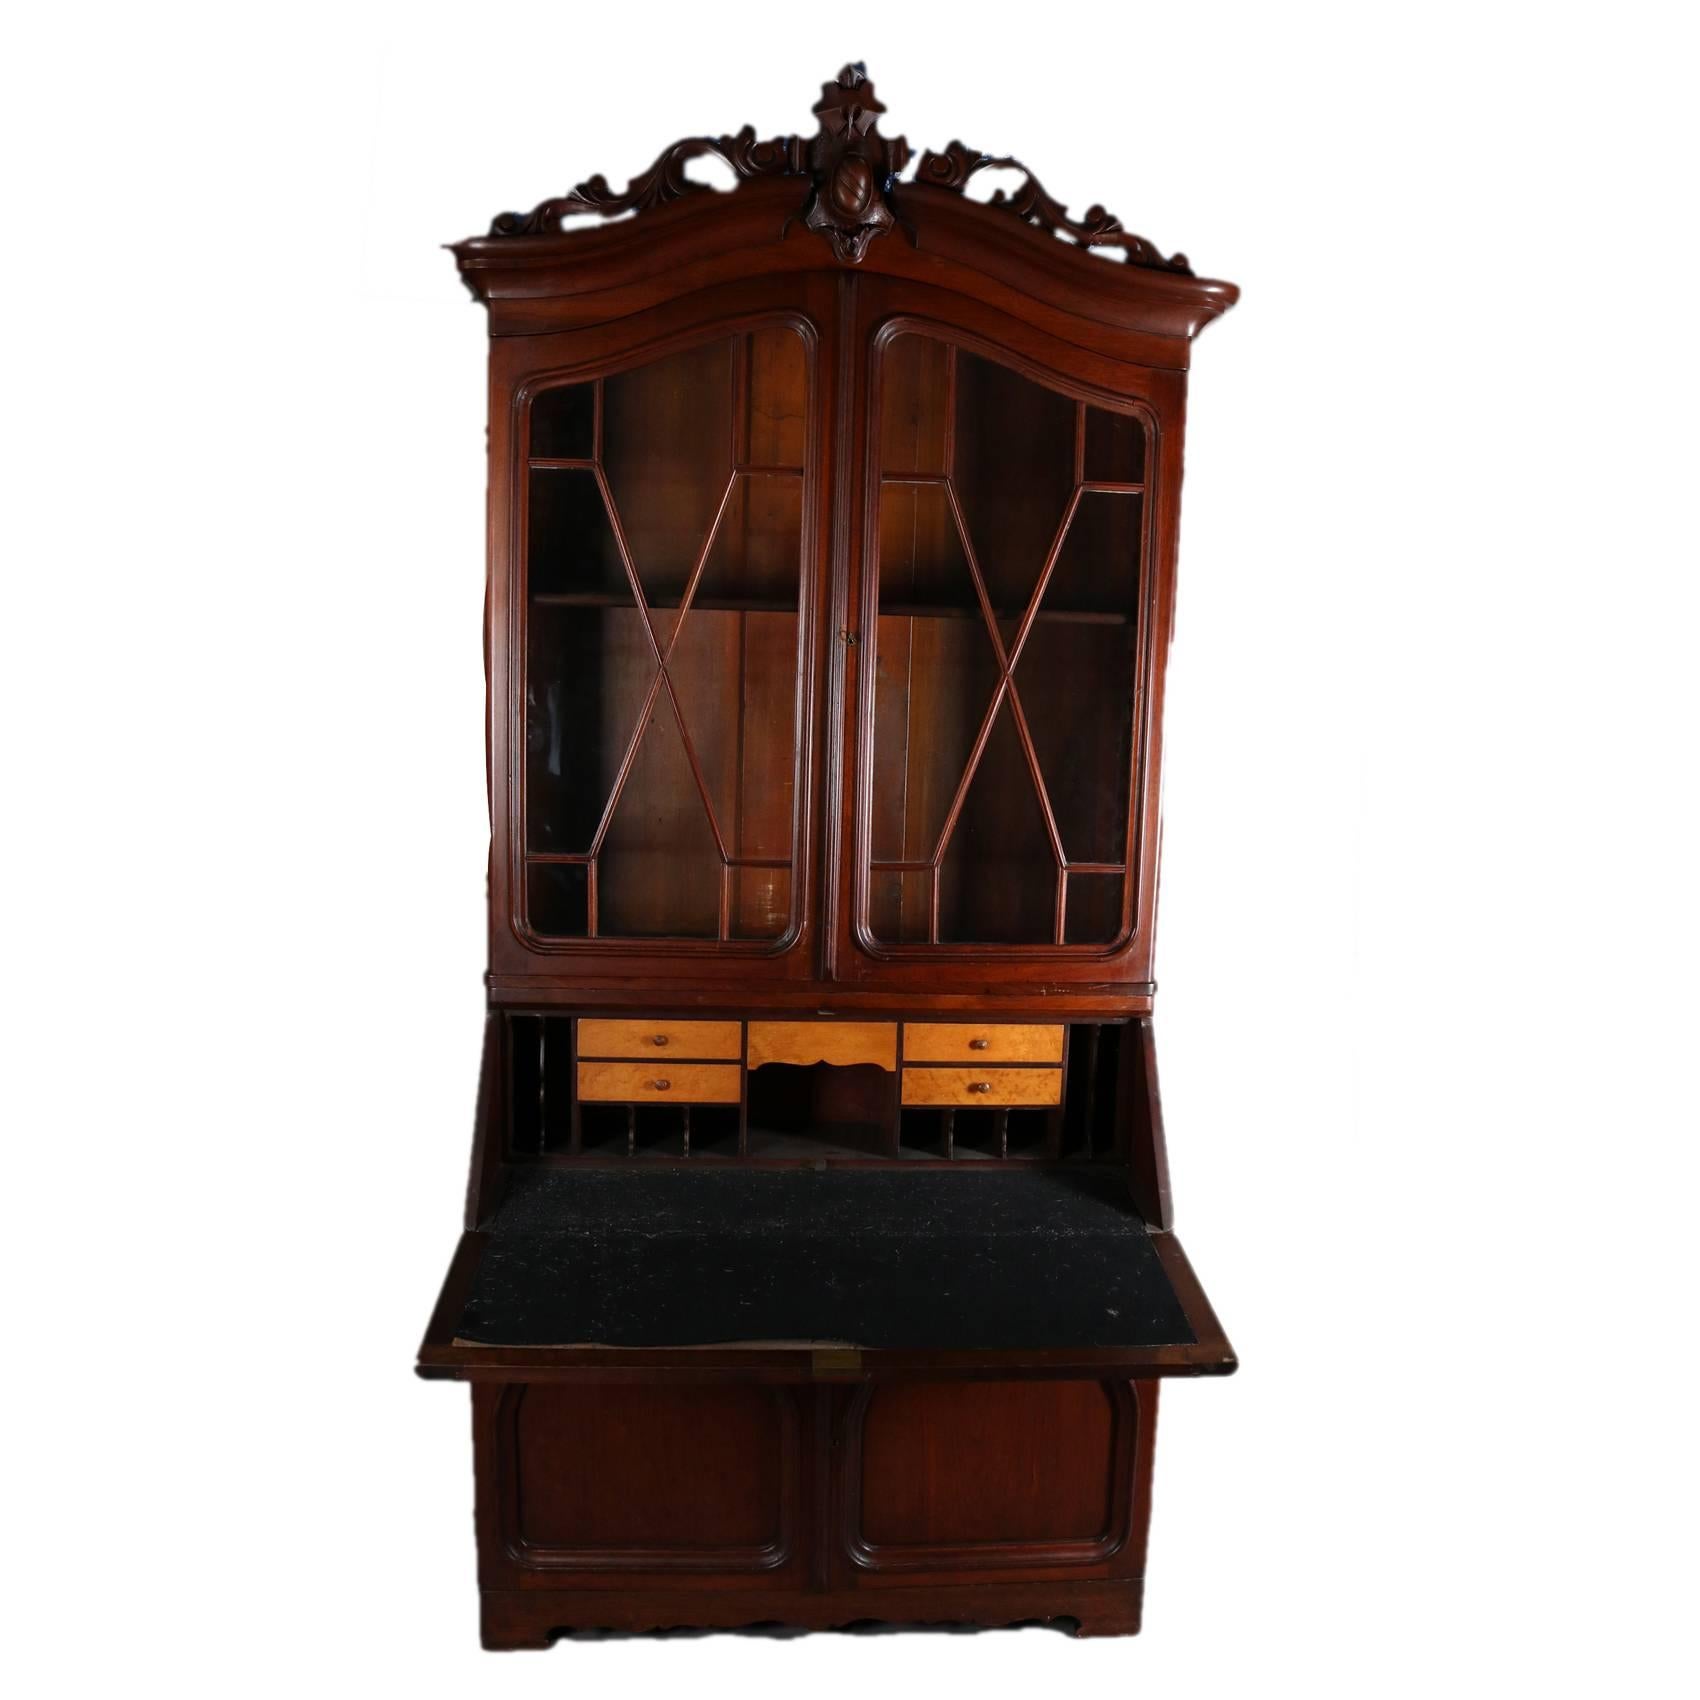 Antique Victorian walnut secretary features carved and pierced foliate crest, glass front bookcase, drop front desk opens to reveal felt writing surface, pigeon holes and drawers; lower doors with arched reserves and bordered by carved foliate